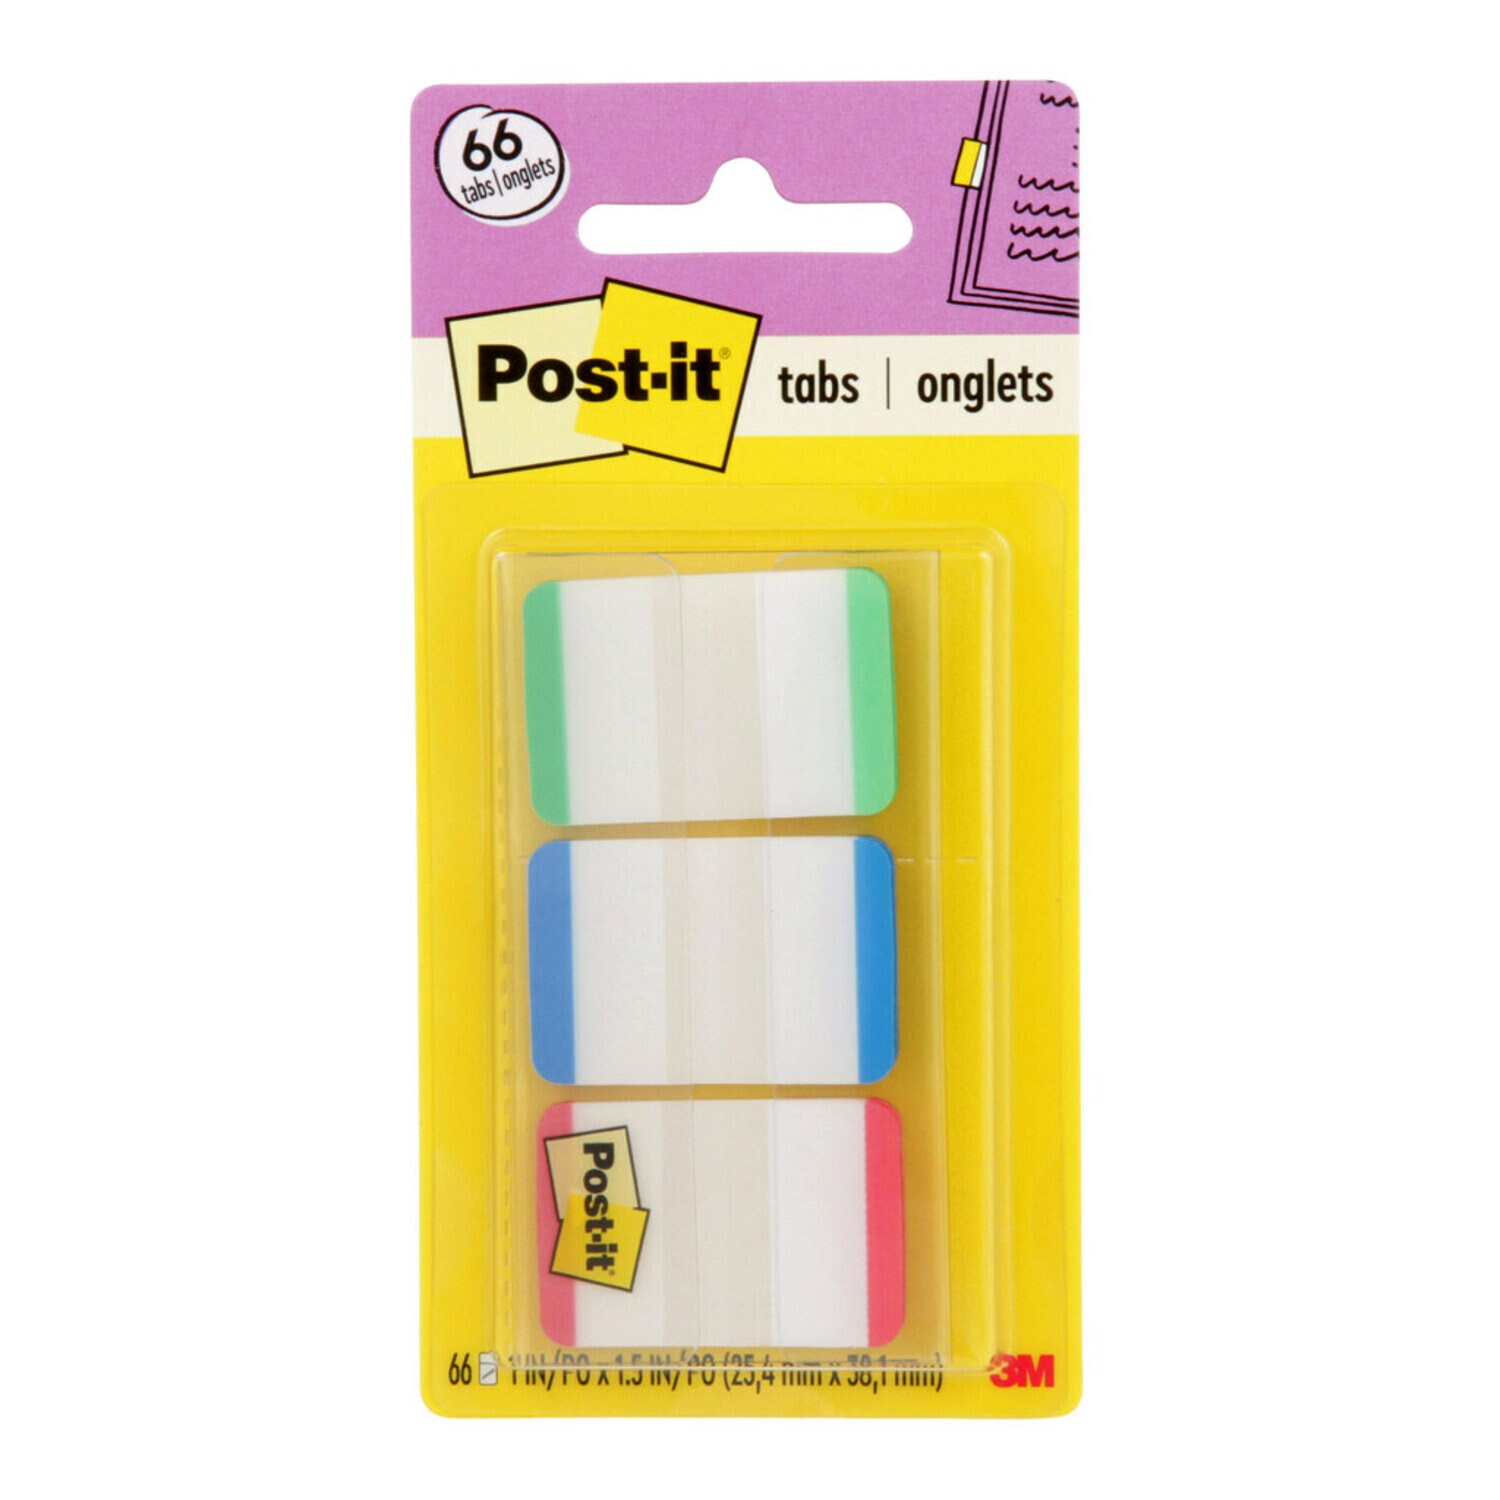 7010291696 - Post-it Durable Tabs 686L-GBR, 1 in. x 1.5 in. Green, Blue, Red 22 Tabs
Pad